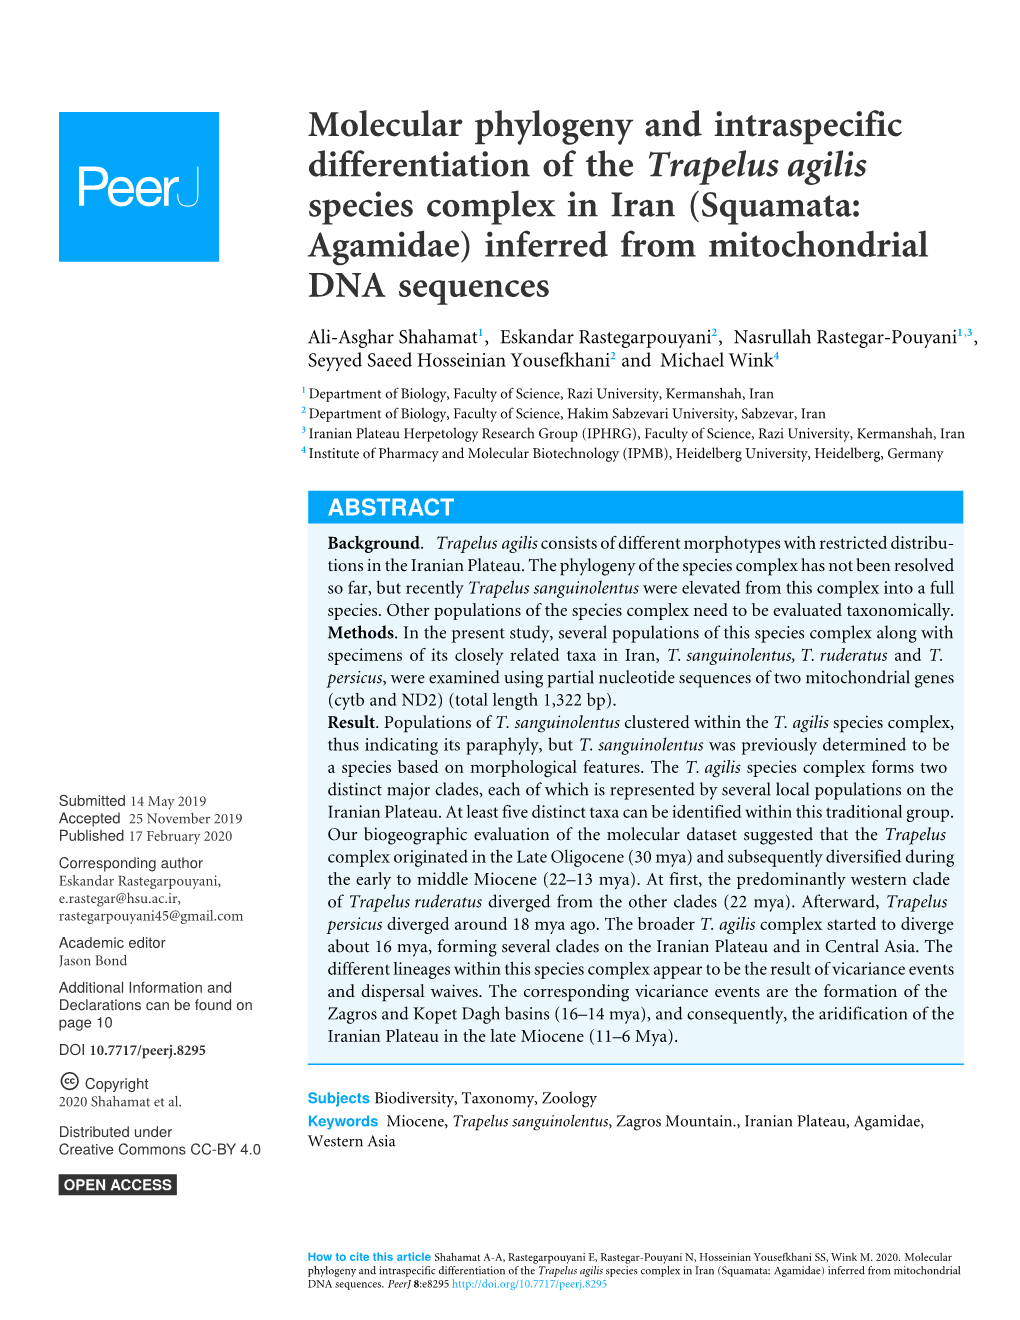 Molecular Phylogeny and Intraspecific Differentiation of the Trapelus Agilis Species Complex in Iran (Squamata: Agamidae) Inferred from Mitochondrial DNA Sequences